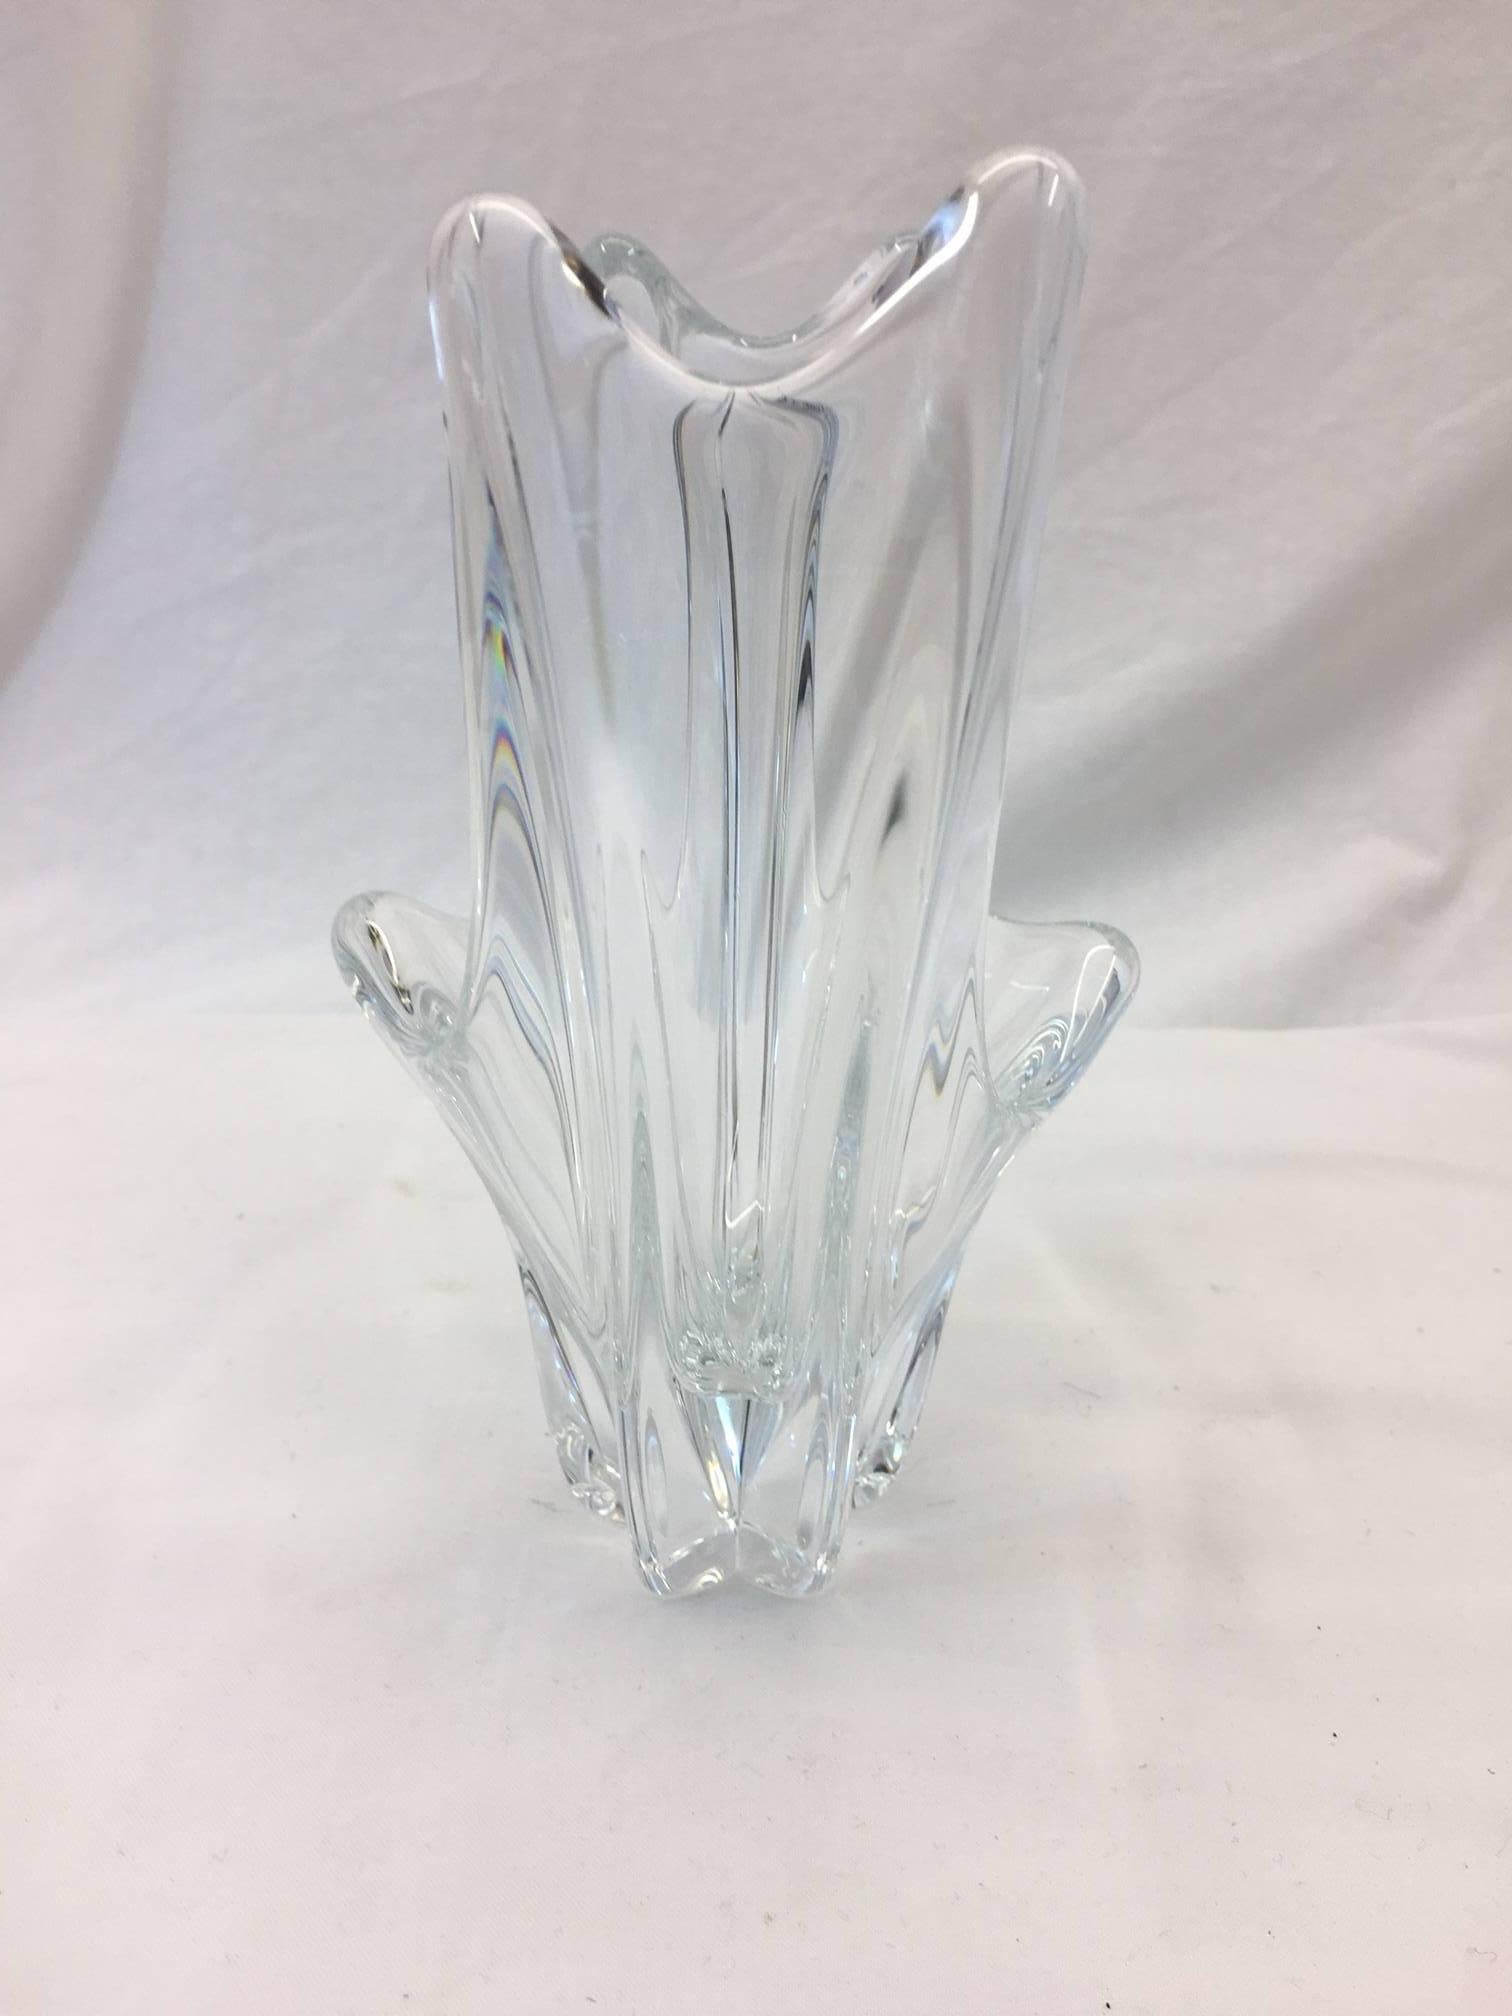 This beautiful Daum Crystal vase is laser signed.  Perfect holiday gift.  